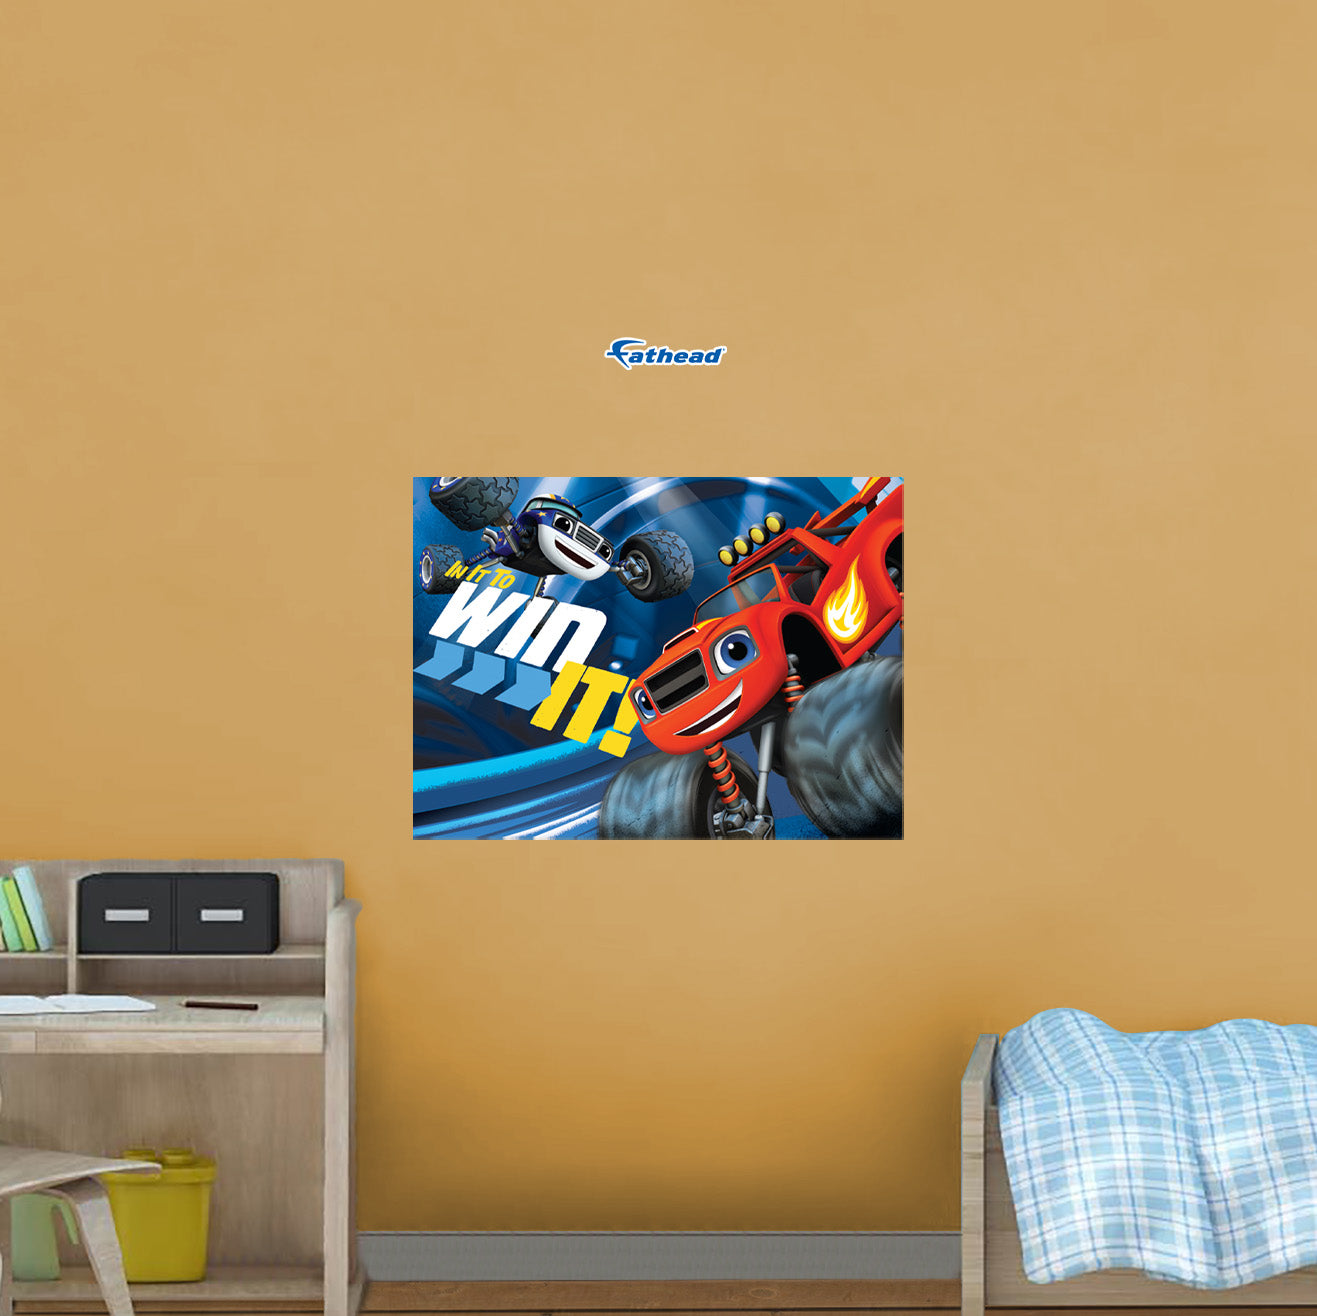 Blaze and the Monster Machines: In It To Win It Poster - Officially Licensed Nickelodeon Removable Adhesive Decal